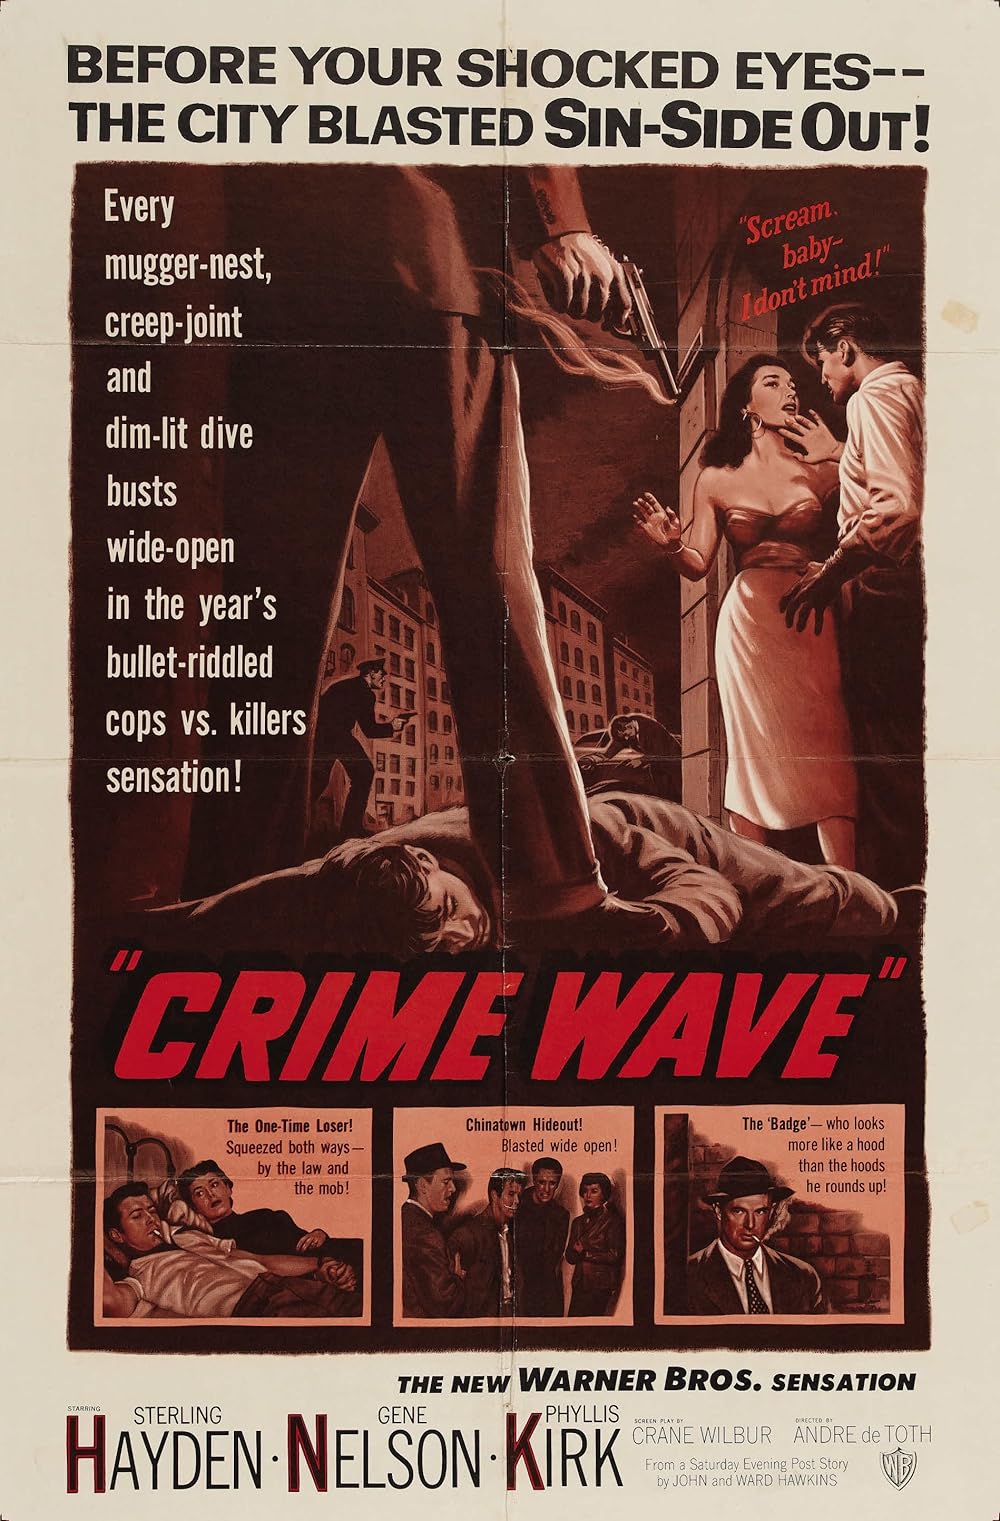 Poster for the 1953 De Toth film Crime Wave starring Sterling Hayden and Gene Nelson